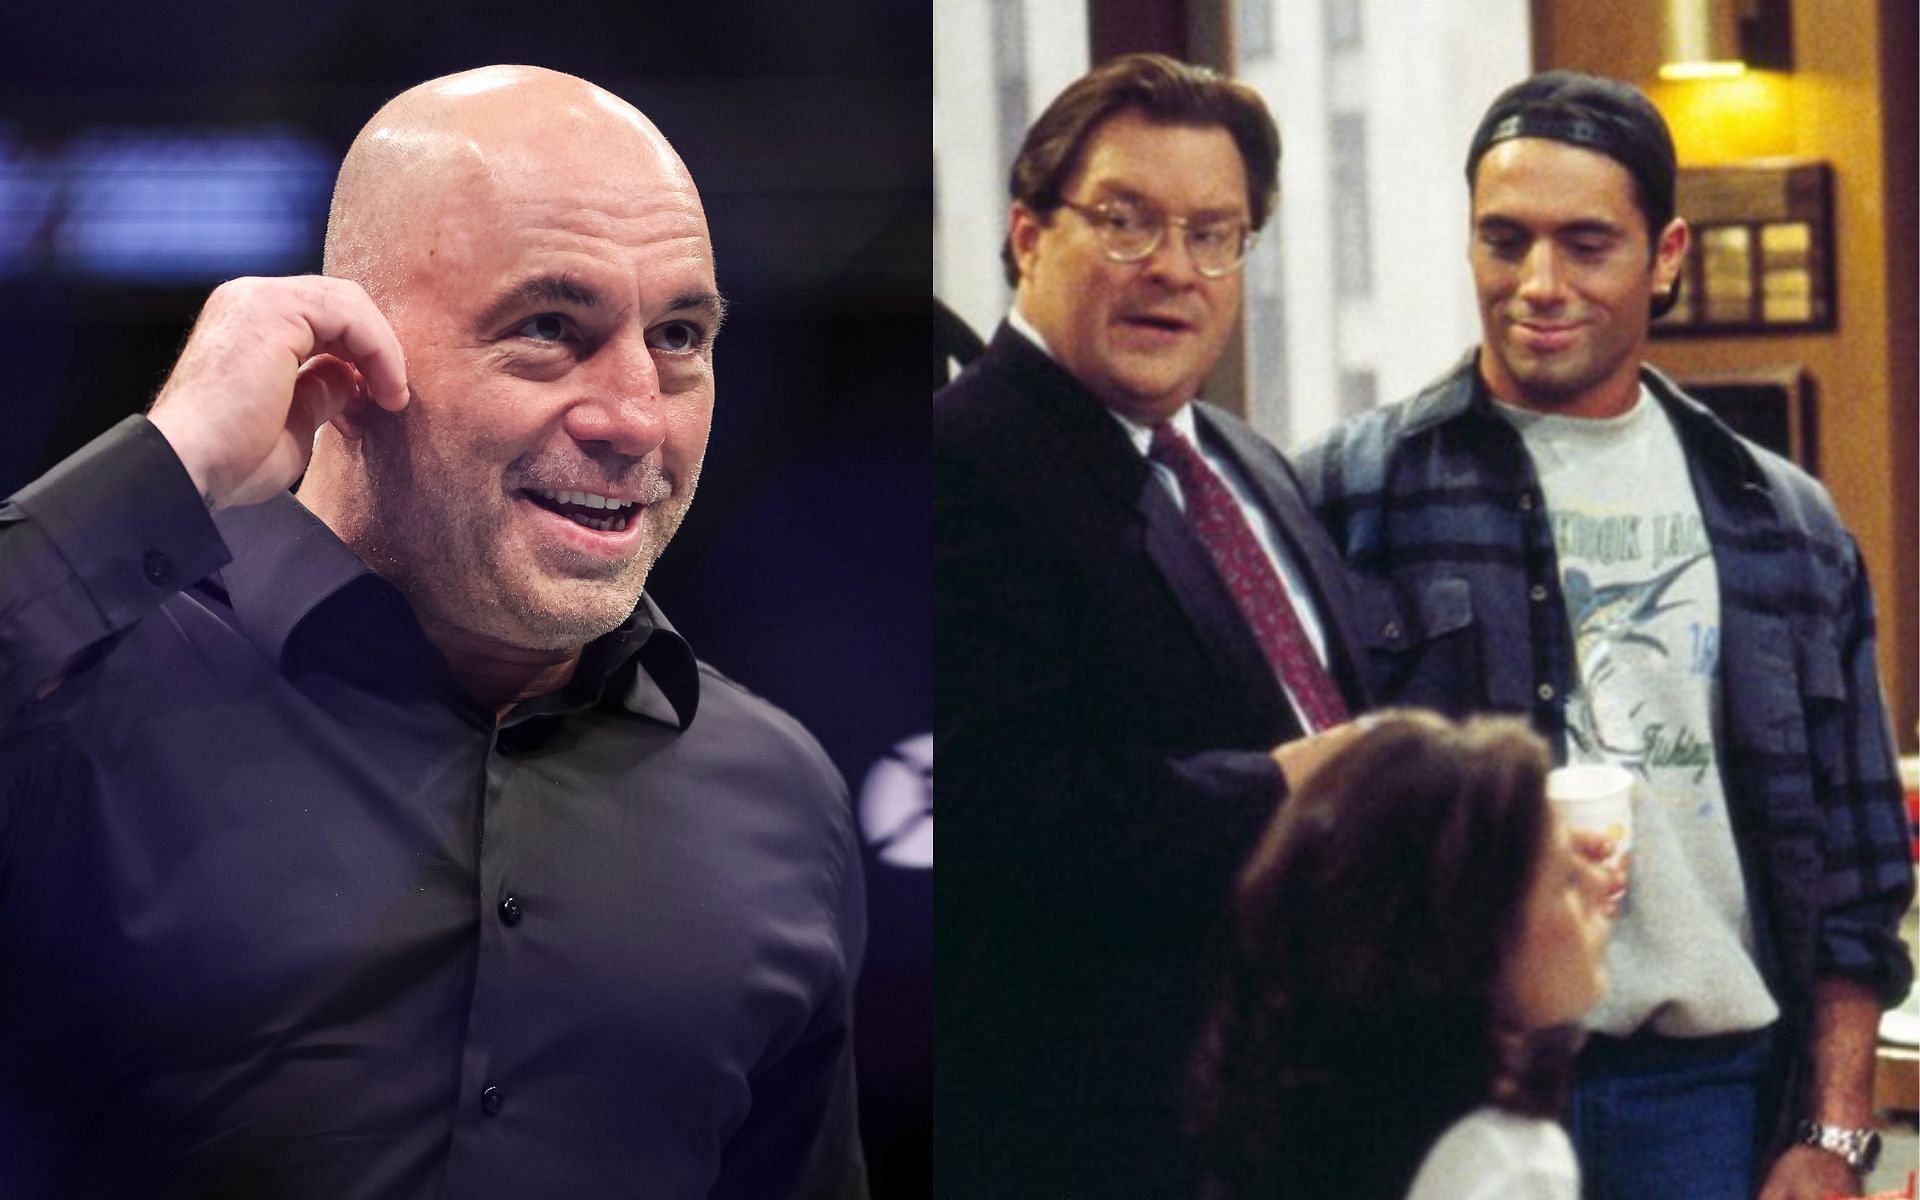 Joe Rogan's TV career Which shows did he appear on?